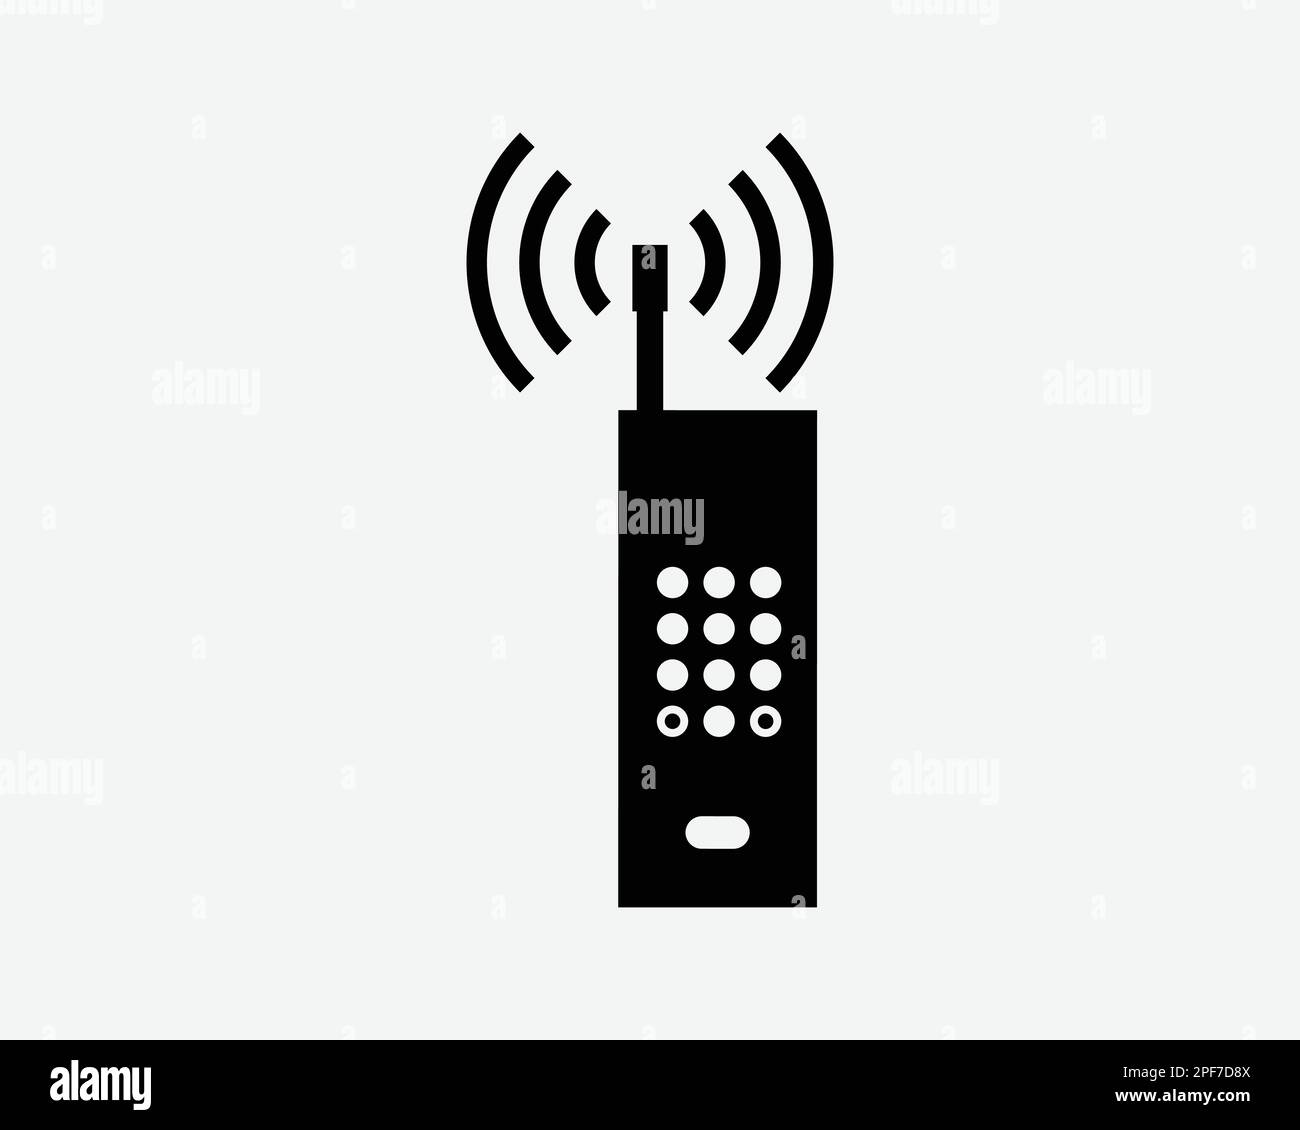 Radio Phone Telecommunication Device Walkie-Talkie Signal Icon Black White Silhouette Symbol Sign Graphic Clipart Artwork Illustration Pictogram Vecto Stock Vector